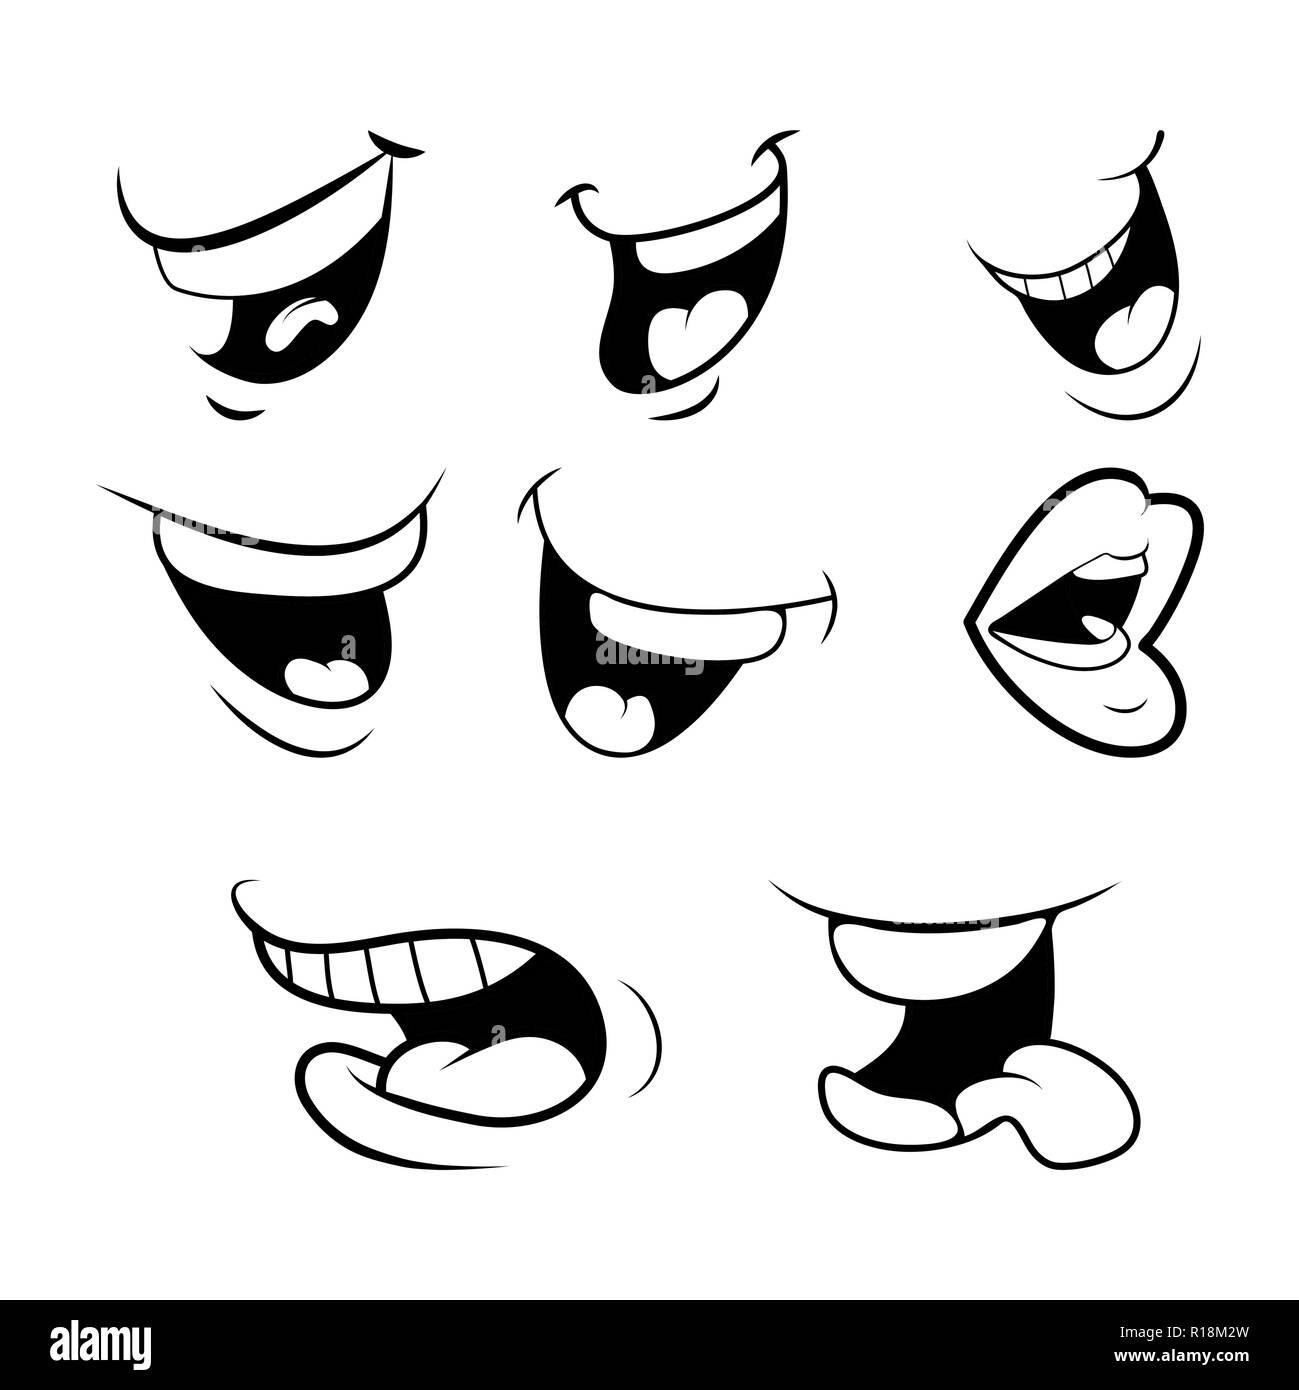 outline Cartoon Mouth Set . Tongue, Smile, Teeth. Expressive Emotions. Simple flat design isolated on white background Stock Vector